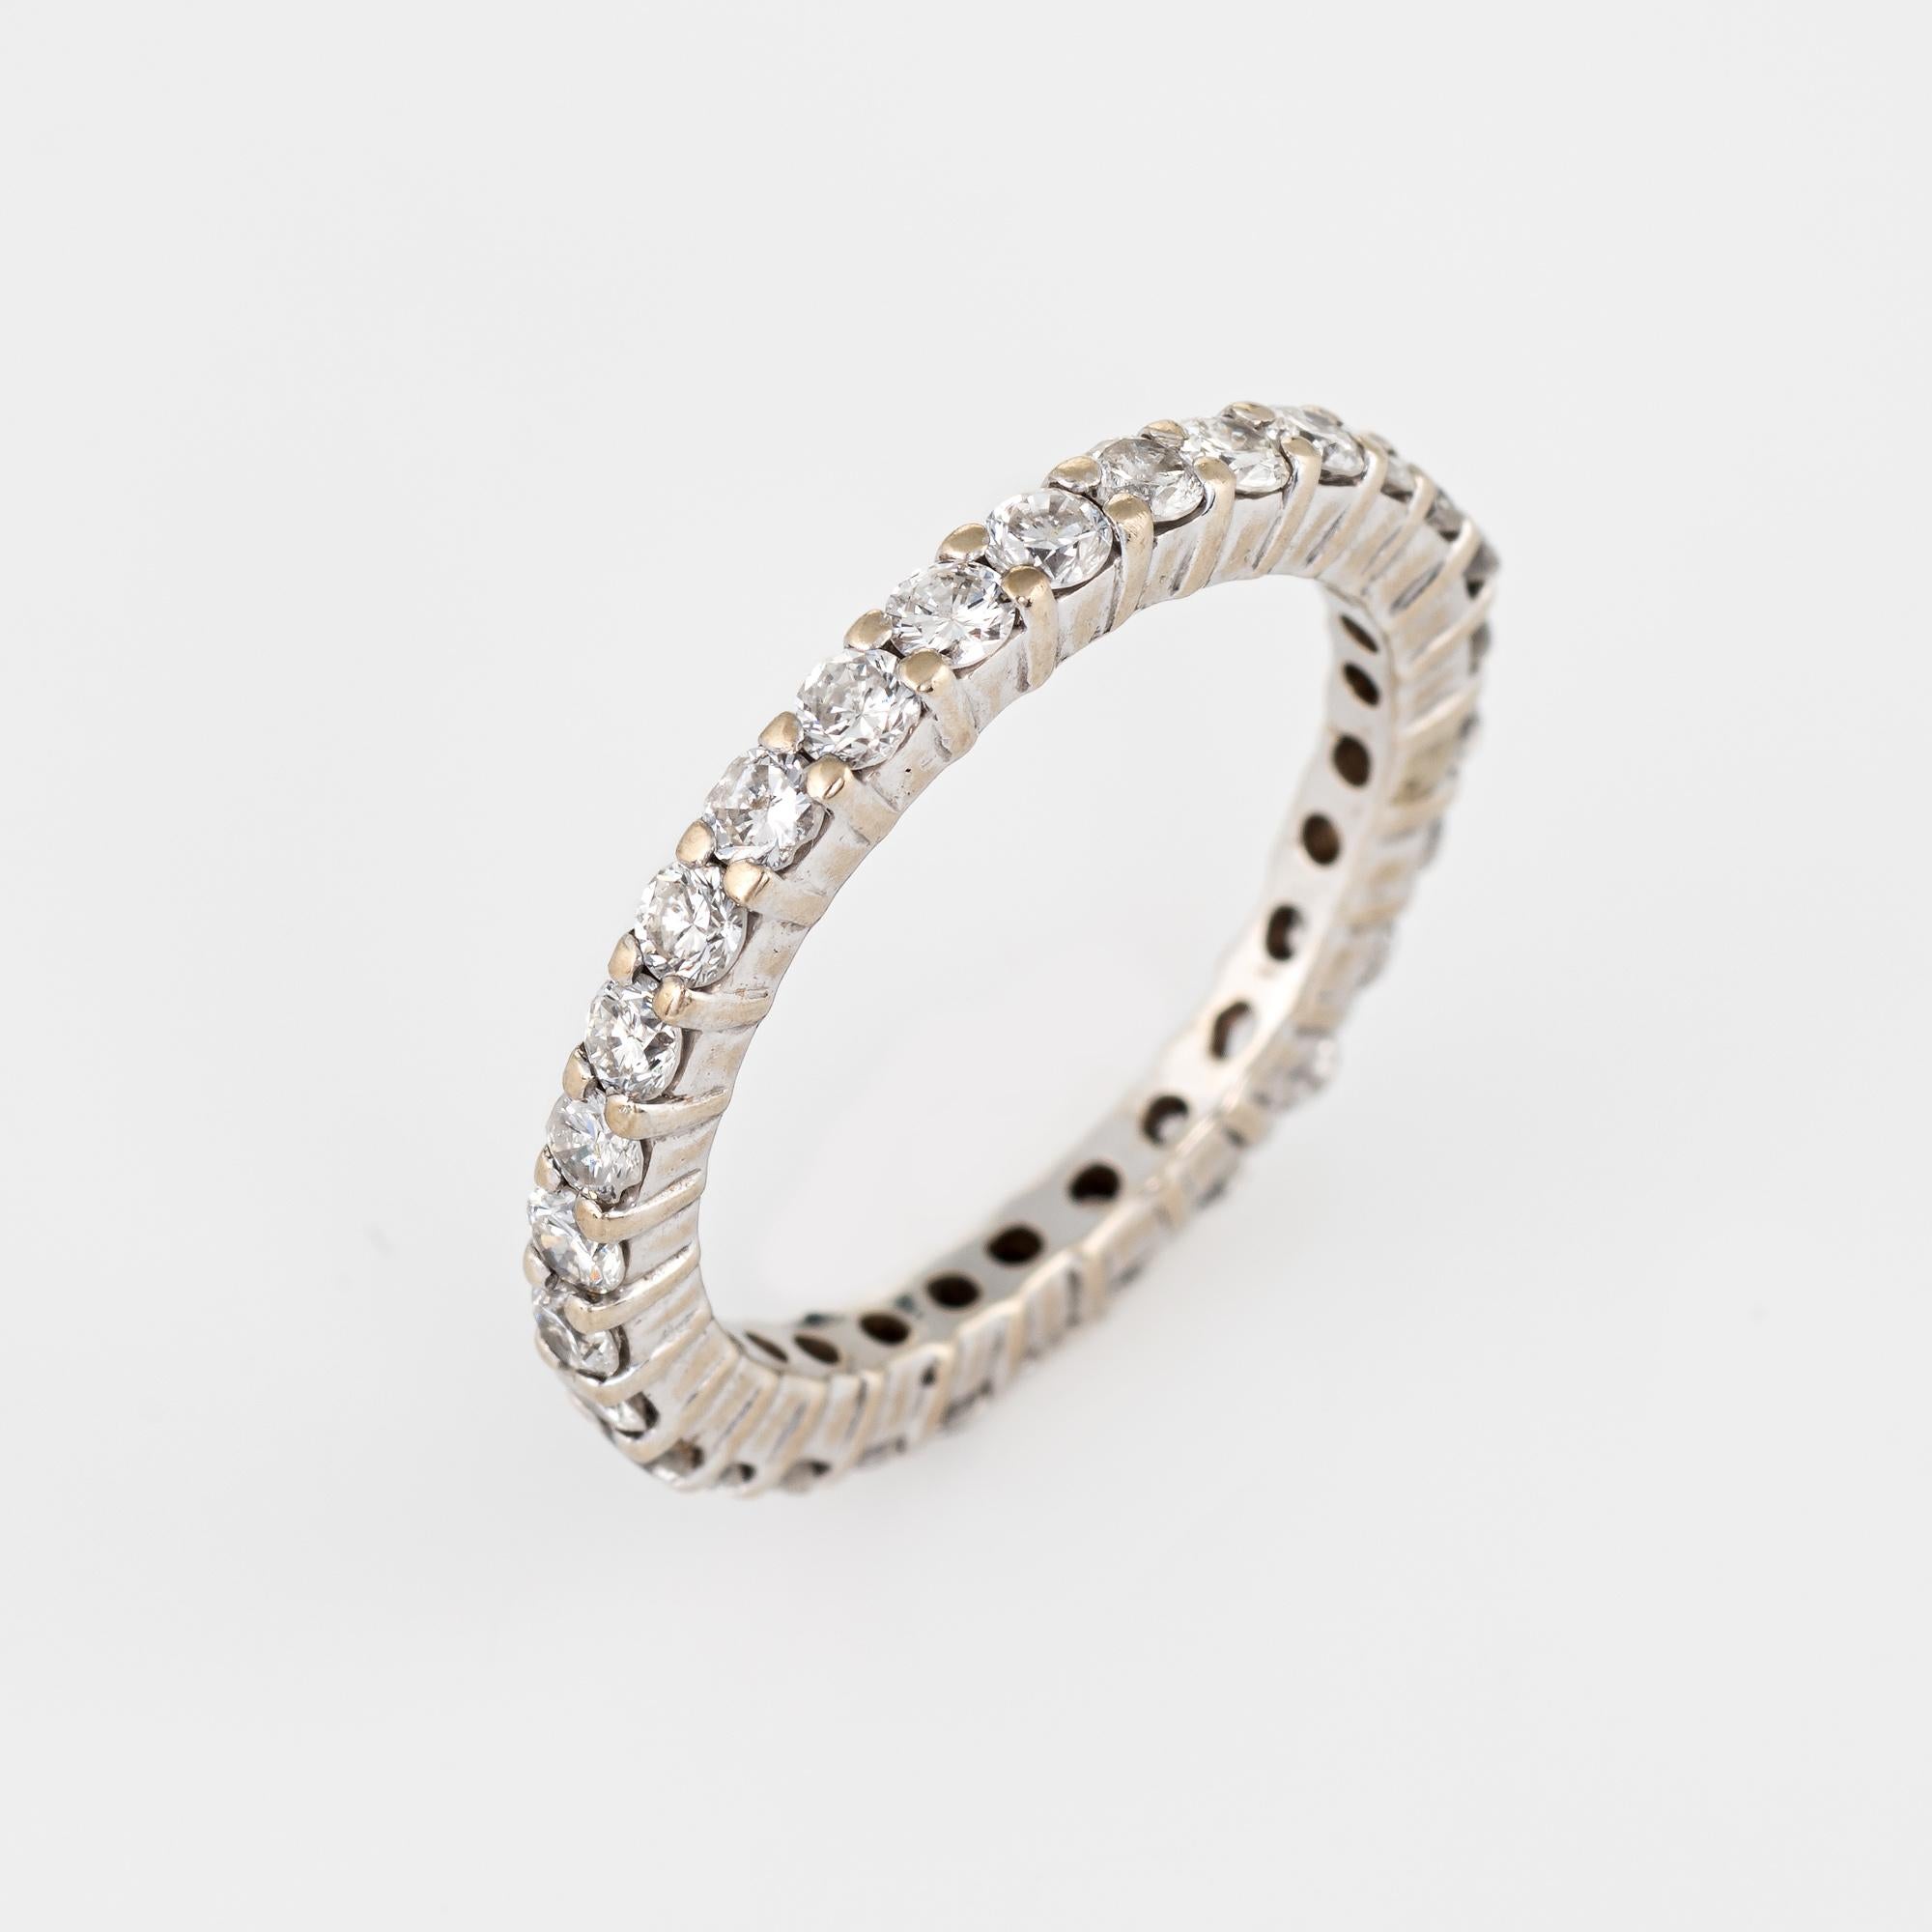 Elegant diamond eternity ring crafted in 14 karat white gold. 

28 estimated 0.03 carat round brilliant cut diamonds total an estimated 0.84 carats (estimated at I-J color and SI1-I1 clarity).

The ring epitomizes vintage charm and would make a